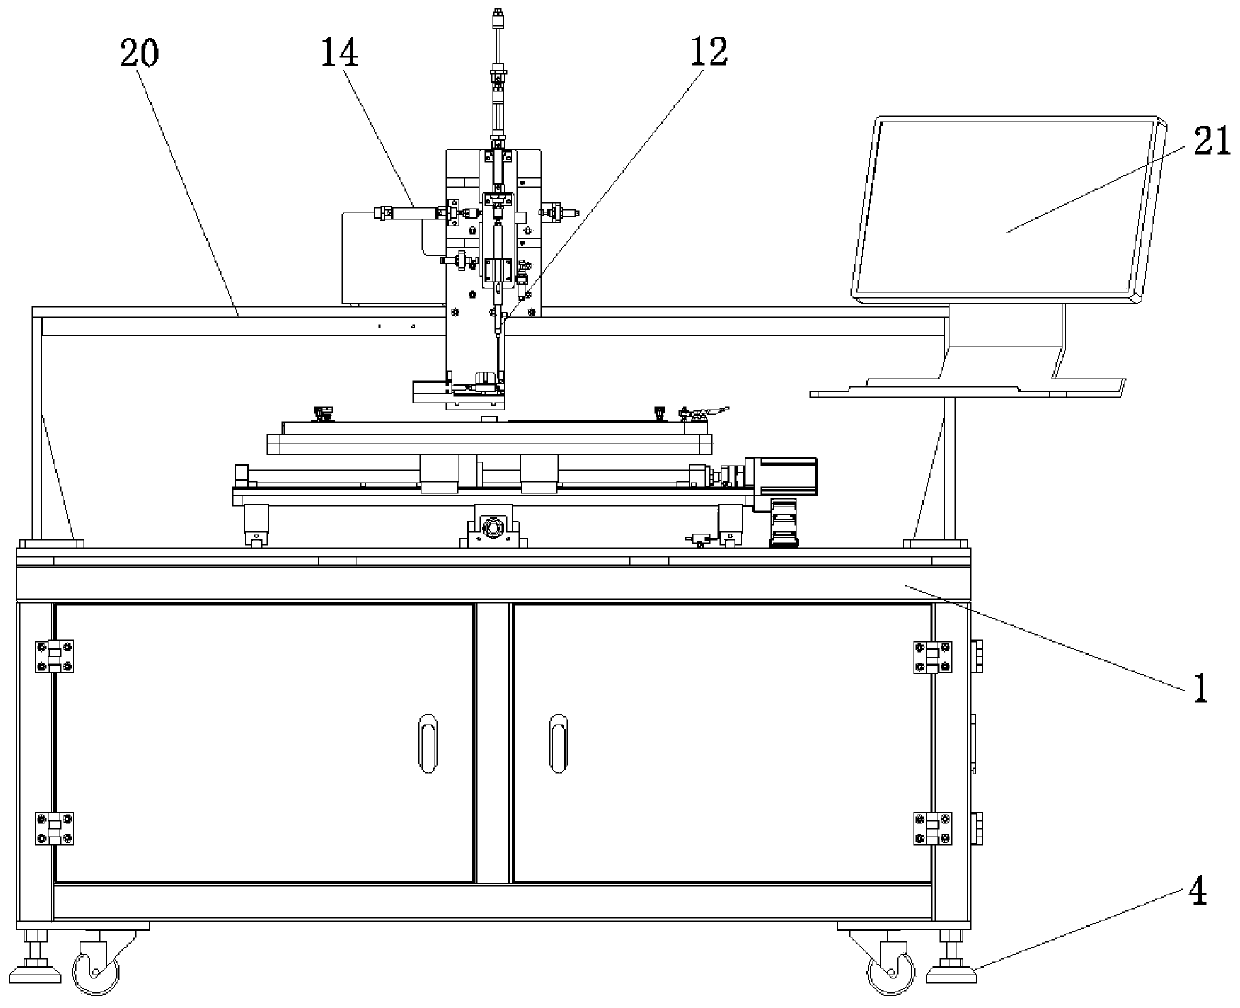 Full-automatic interface board assembly equipment